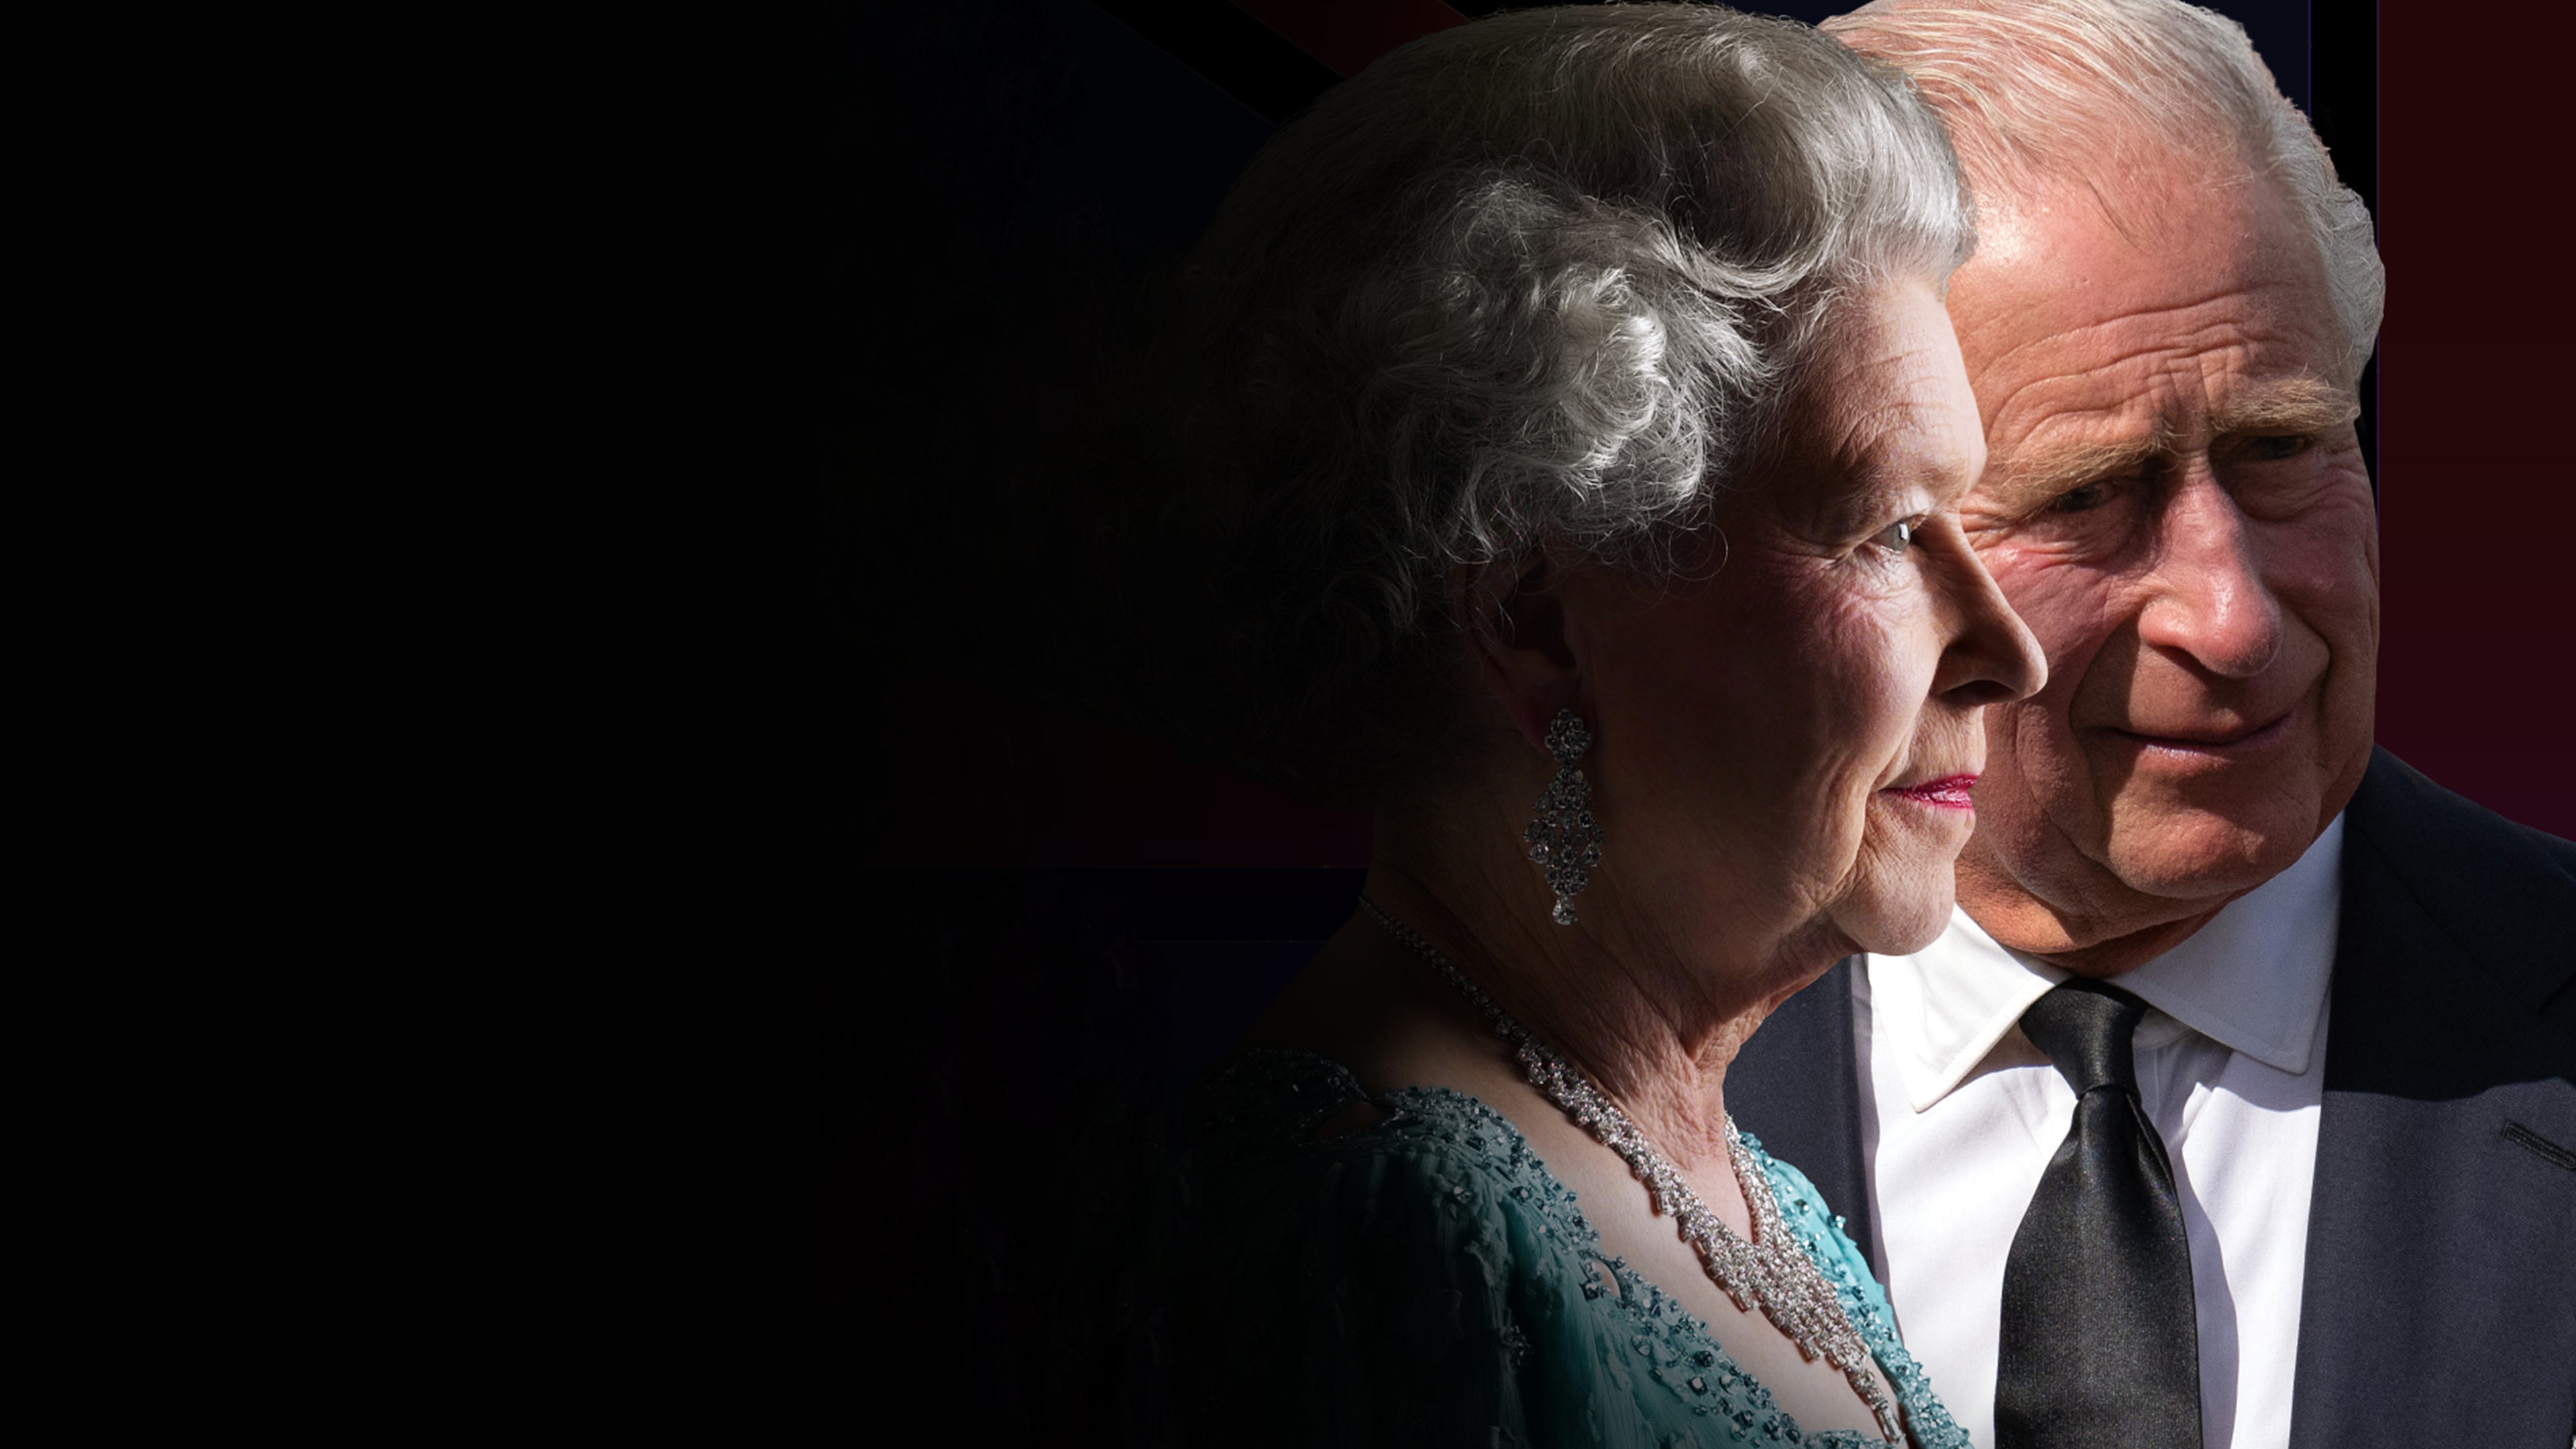 Queen Elizabeth II: Passing of the Crown - A Special Edition of 20/20